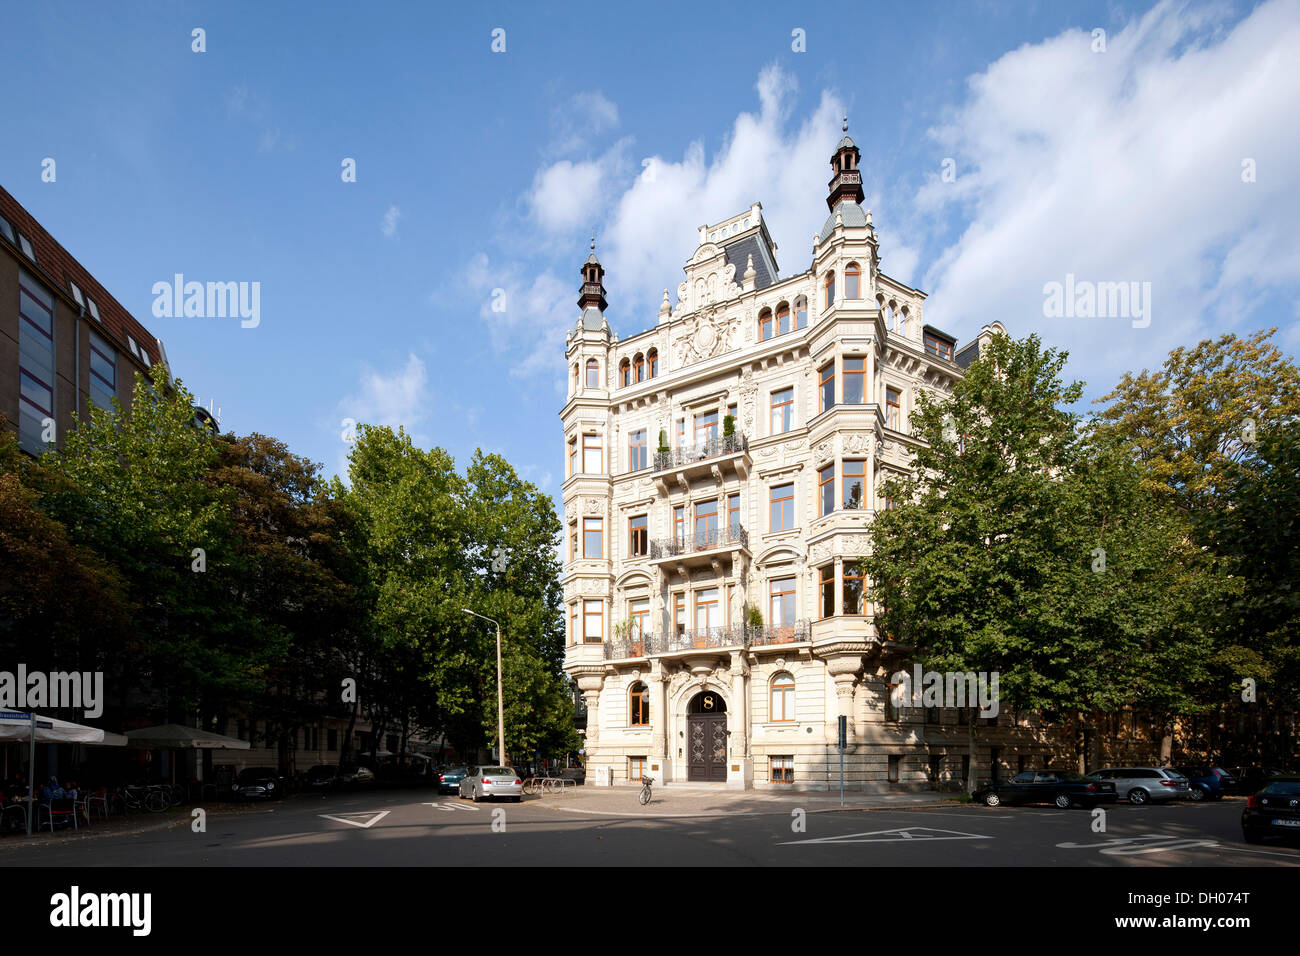 Prestigious residential and commercial building, Musikerviertel district, Leipzig, Saxony, PublicGround Stock Photo